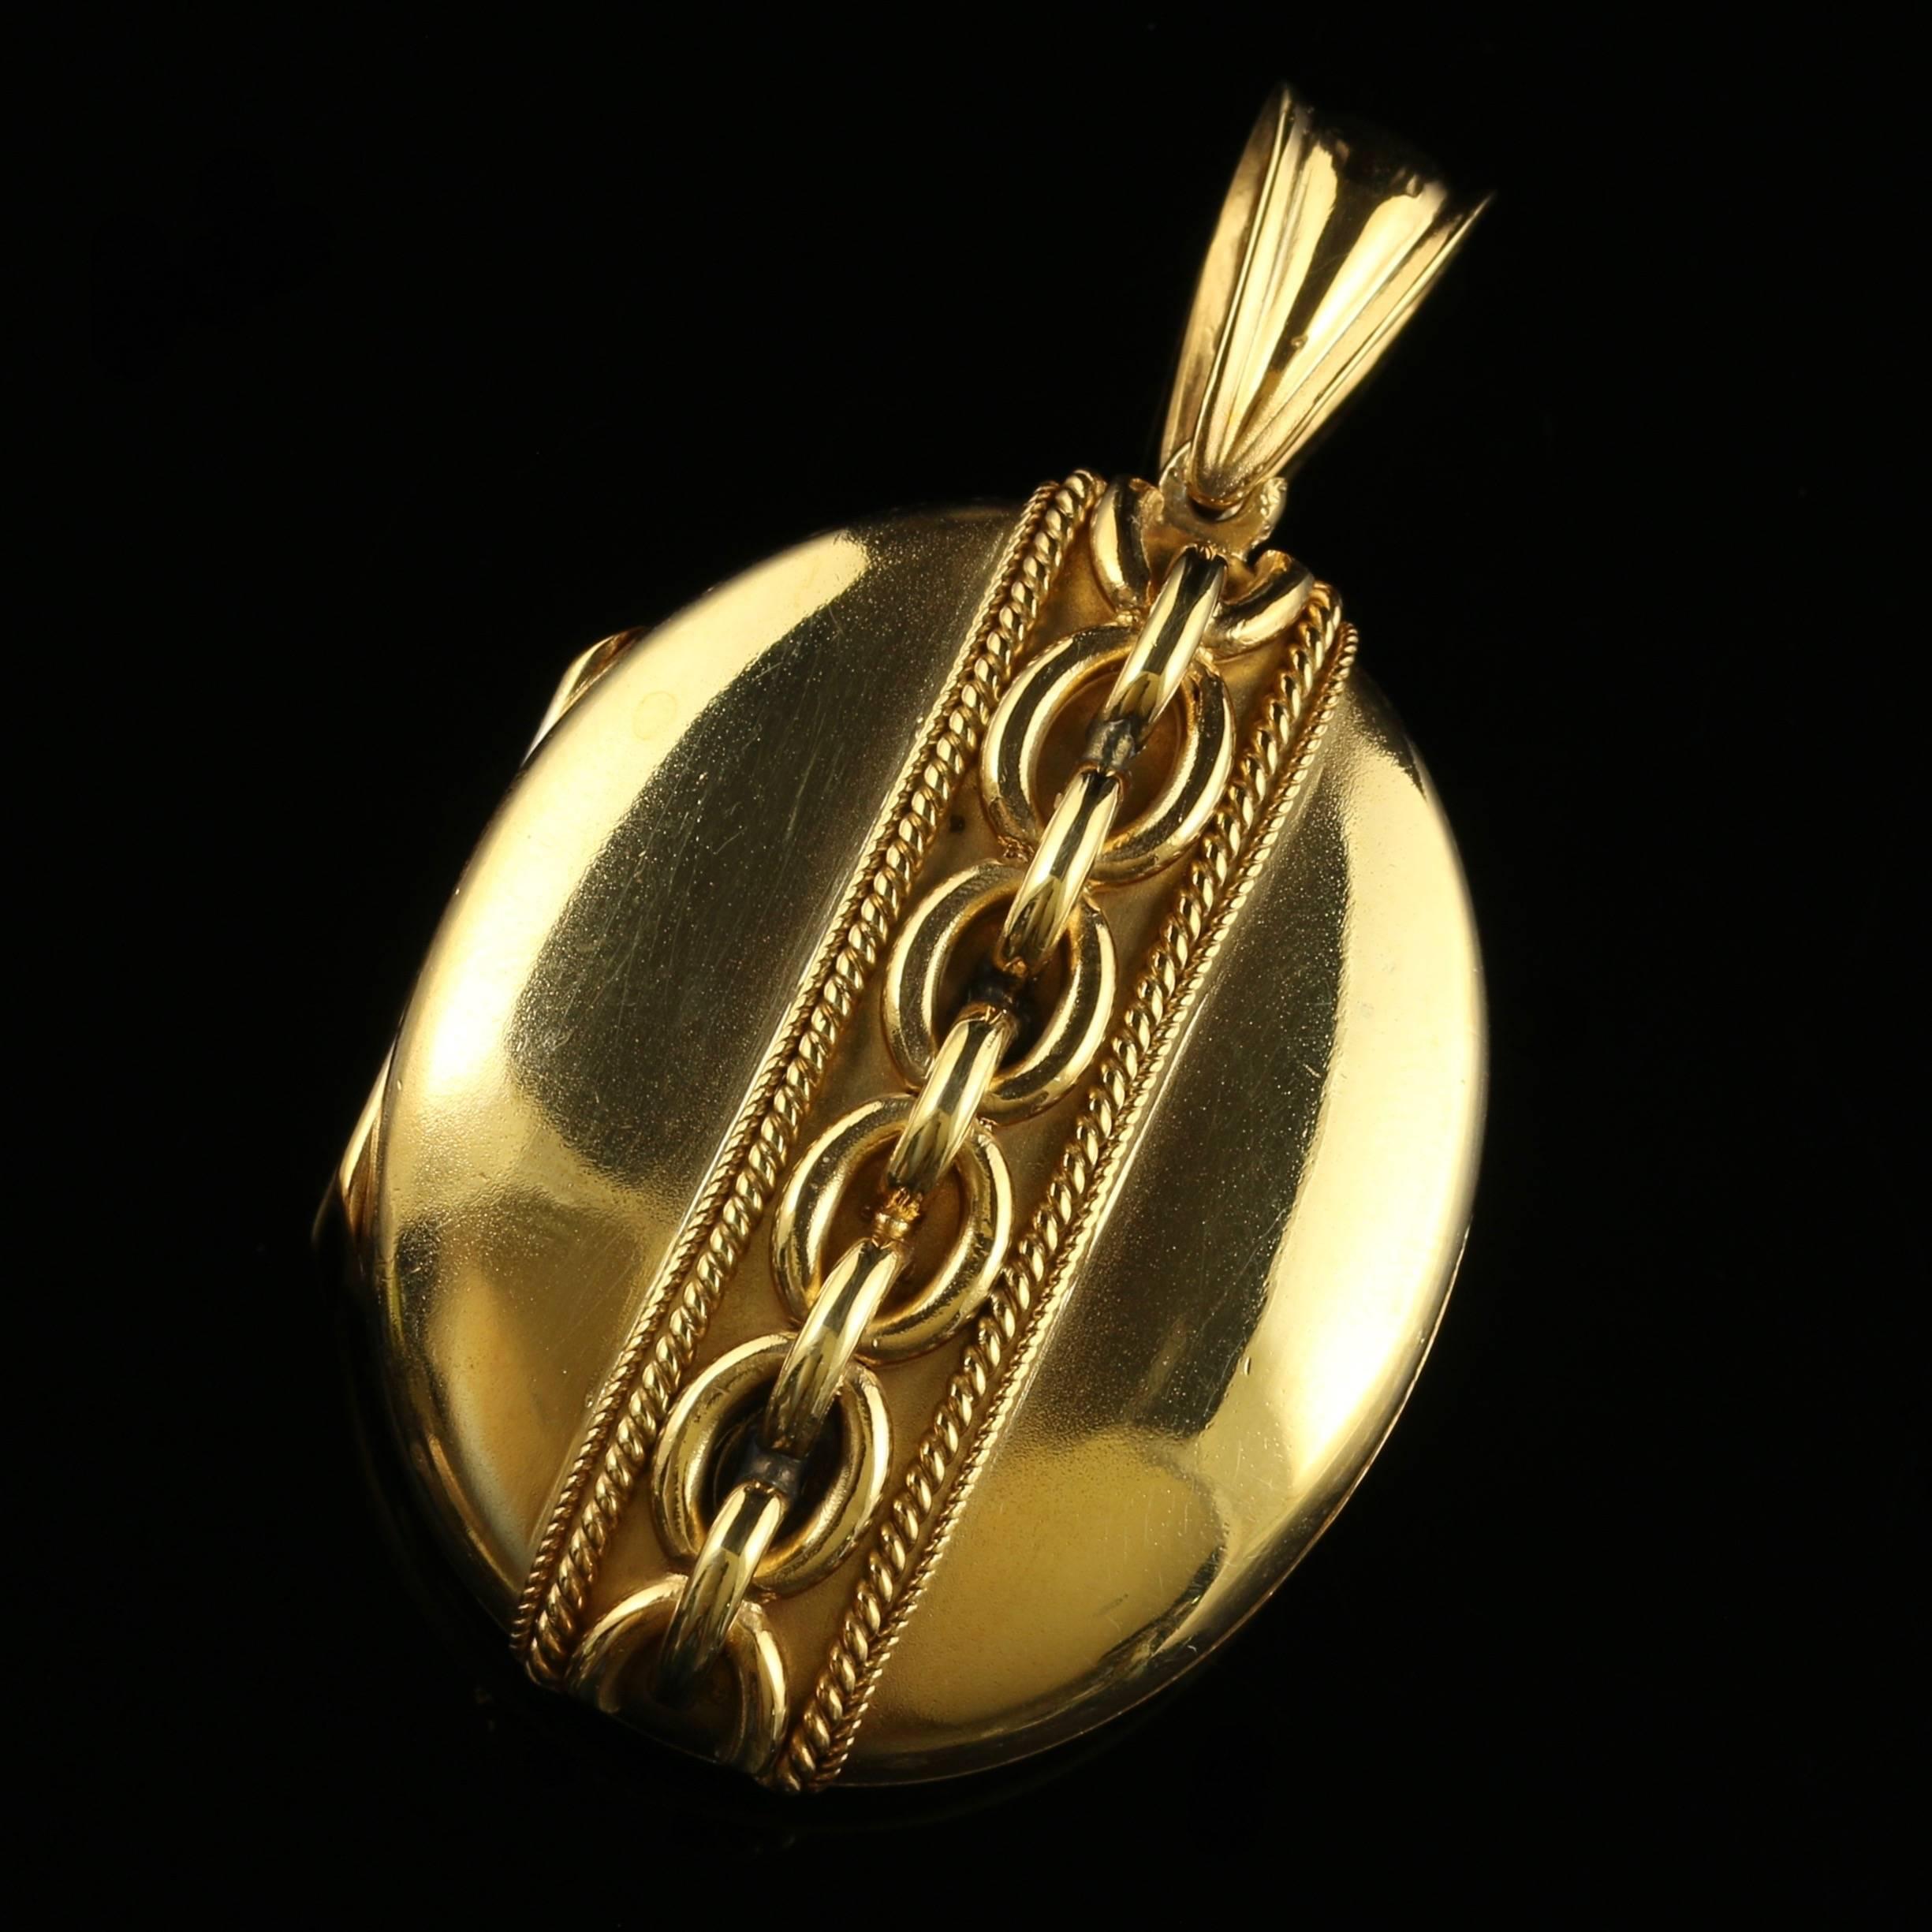 For more details please click continue reading down below...

This fabulous Antique Victorian locket is Circa 1880, set in 18ct Gold on Silver.

The locket is set with beautiful chain detailing on the front.

The locket opens up to show two glass